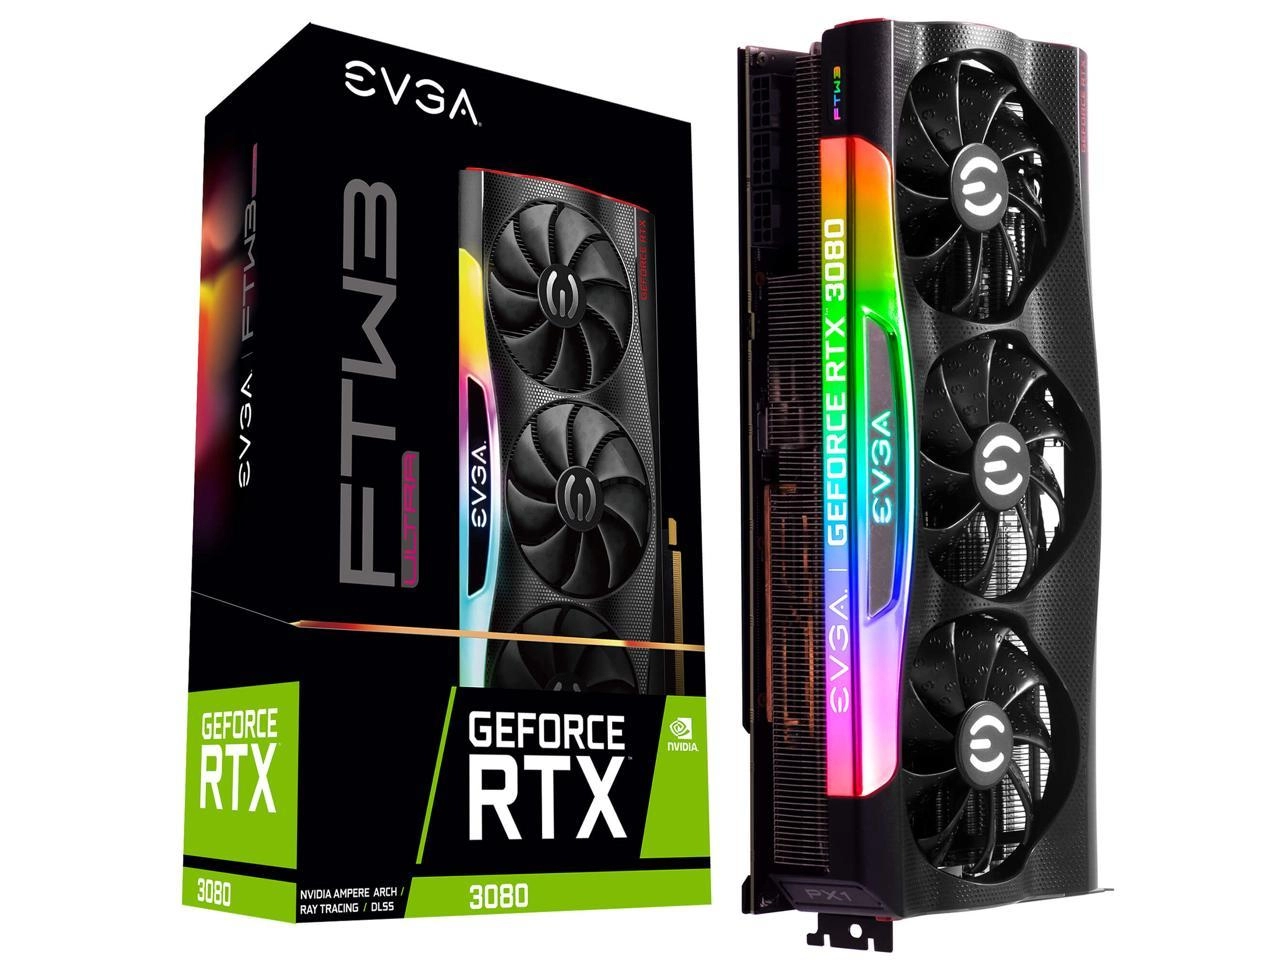 EVGA GeForce RTX 3080 FTW3 ULTRA GAMING 10GB Package